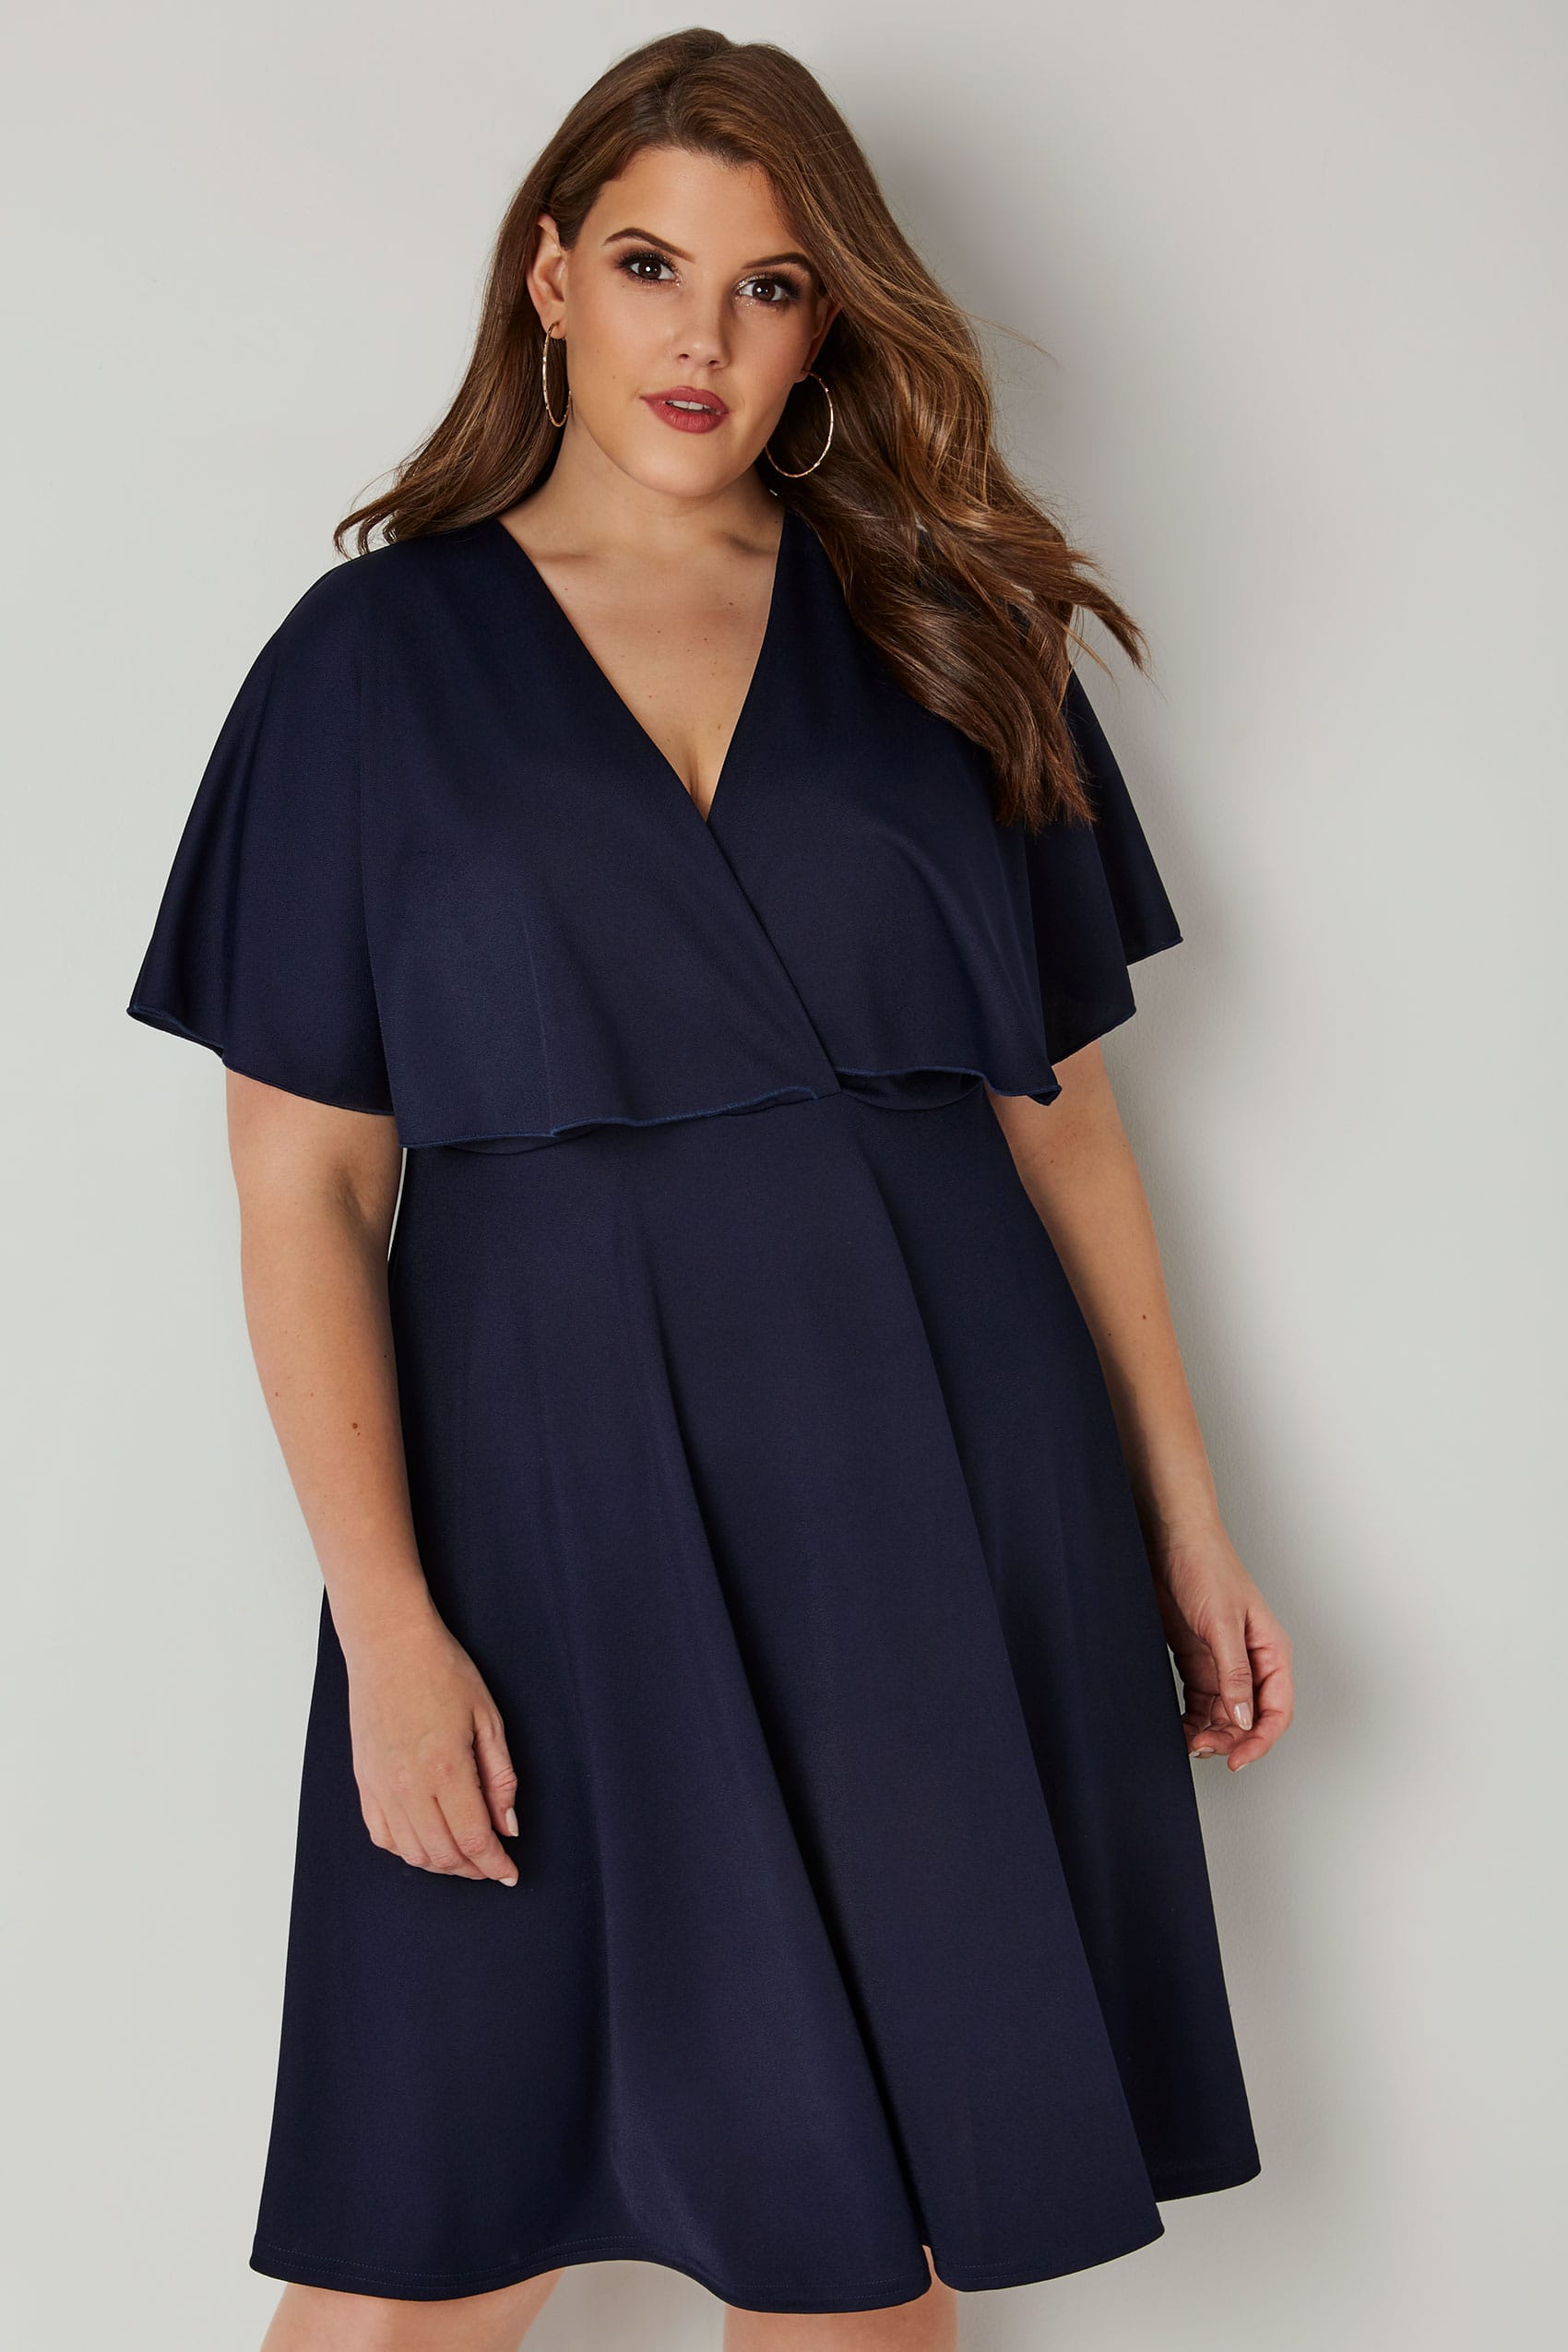 LIMITED COLLECTION Navy Angel Sleeve Wrap Dress, plus size 16 to 36